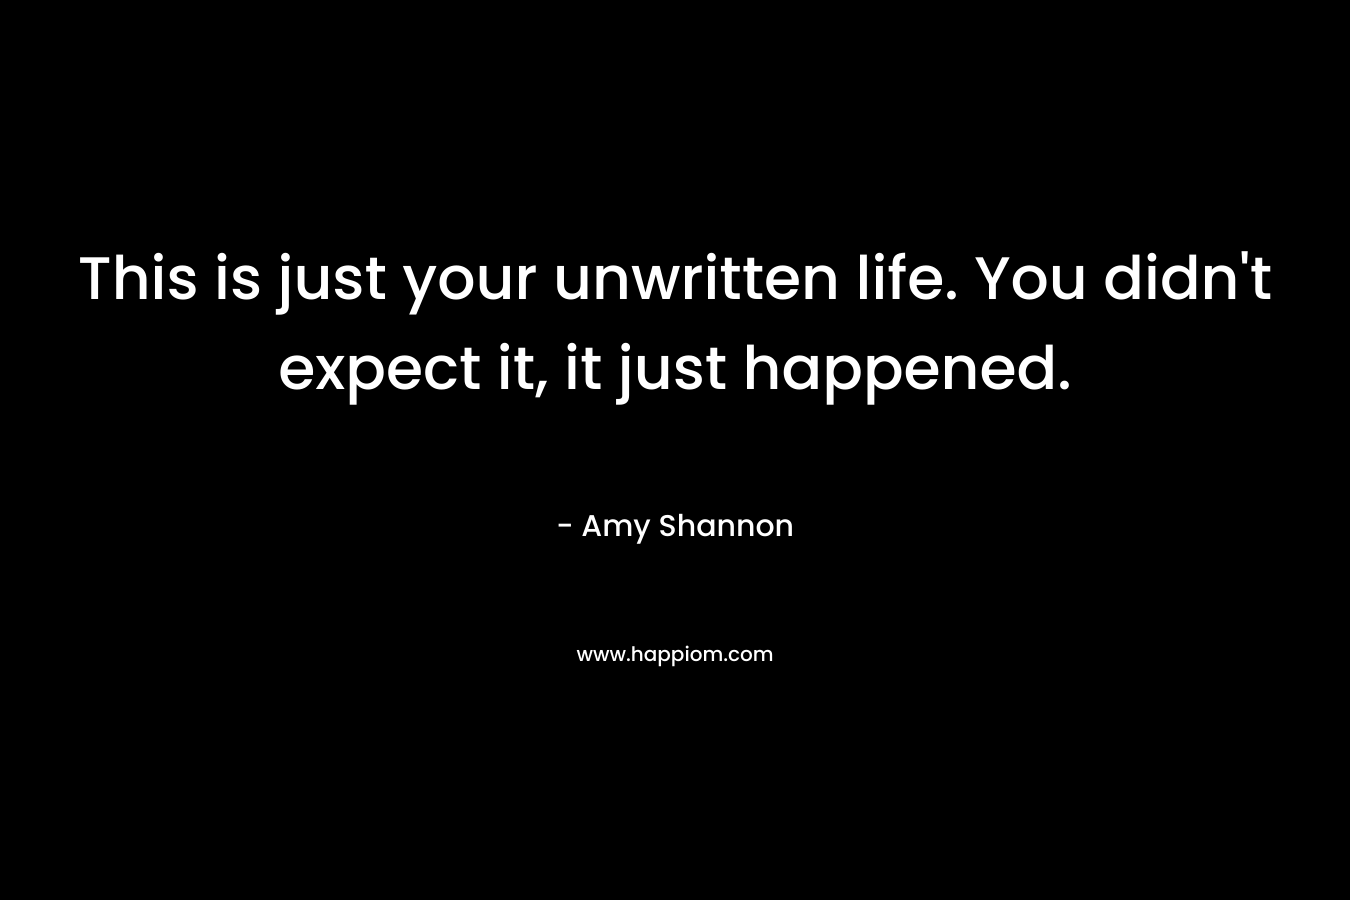 This is just your unwritten life. You didn't expect it, it just happened.